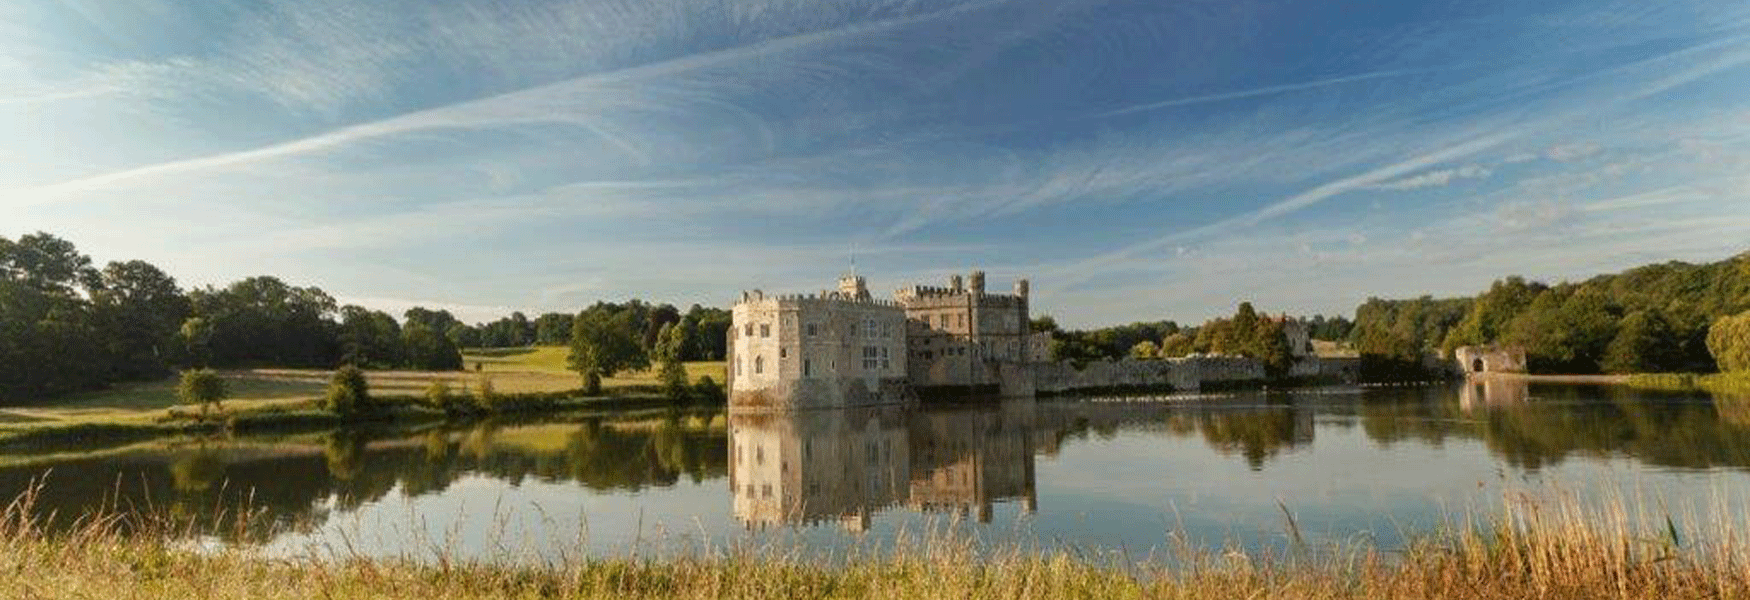 Leeds Castle across the Mote in the late summer with a reflection